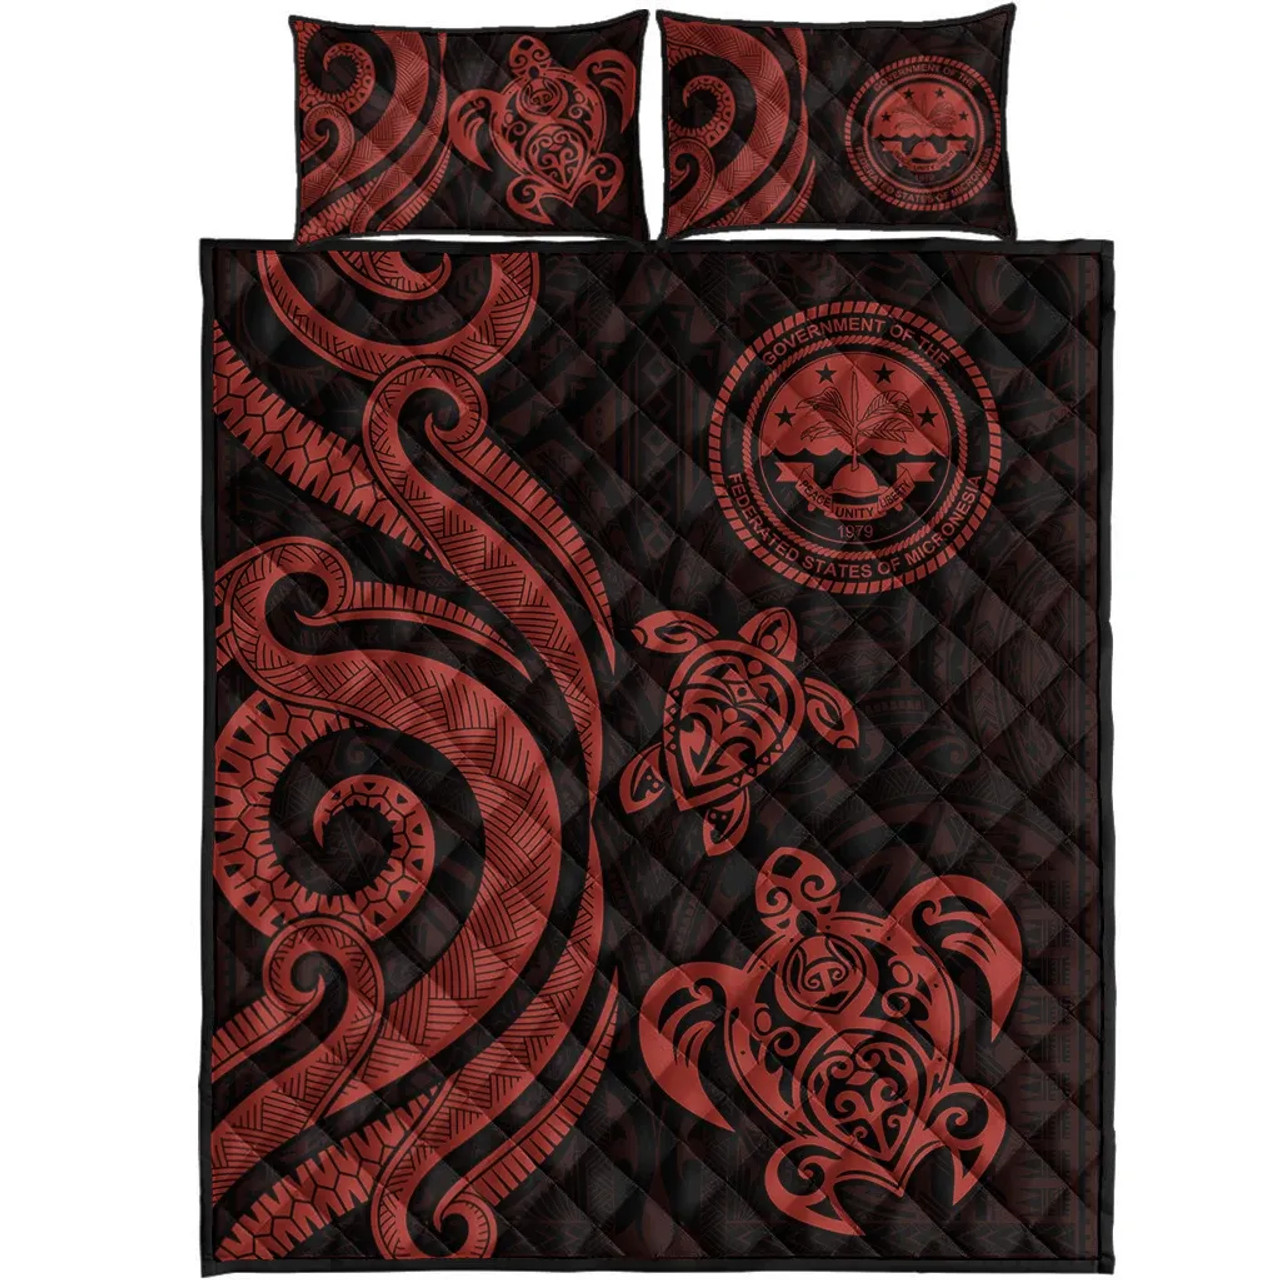 Federated States of Micronesia Quilt Bed Set - Red Tentacle Turtle 5